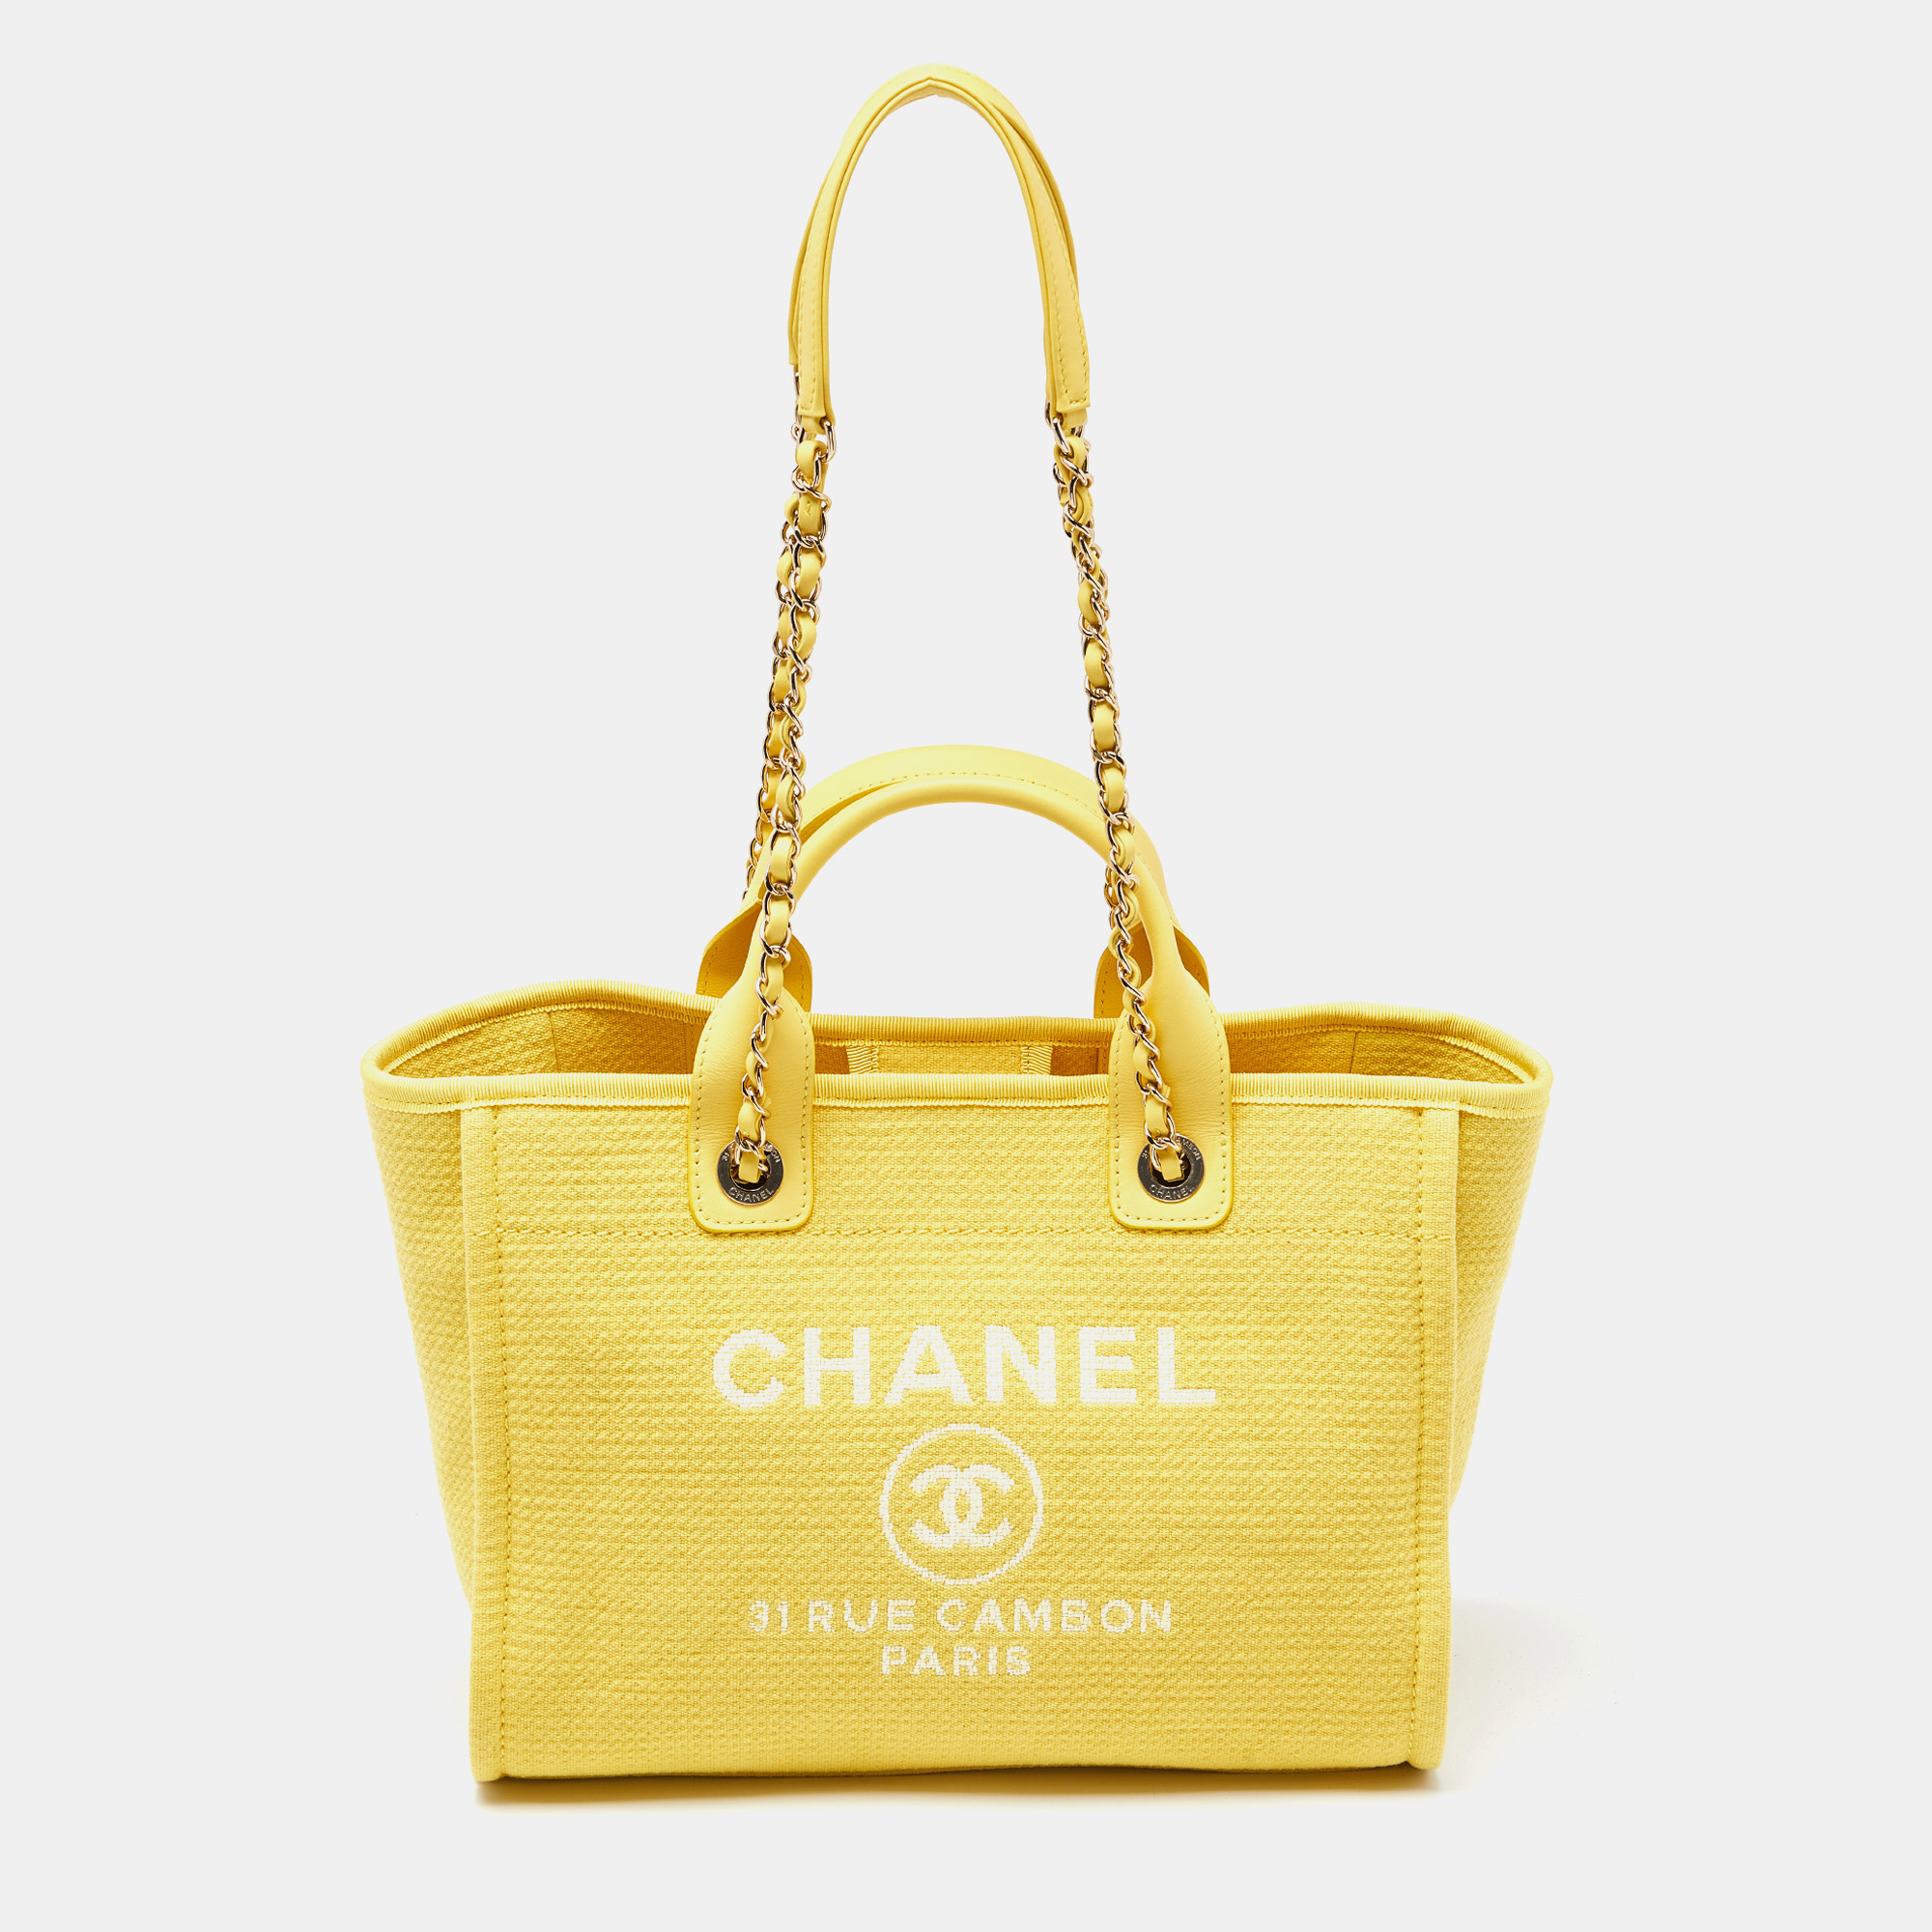 Chanel yellow canvas and leather small deauville shopper tote